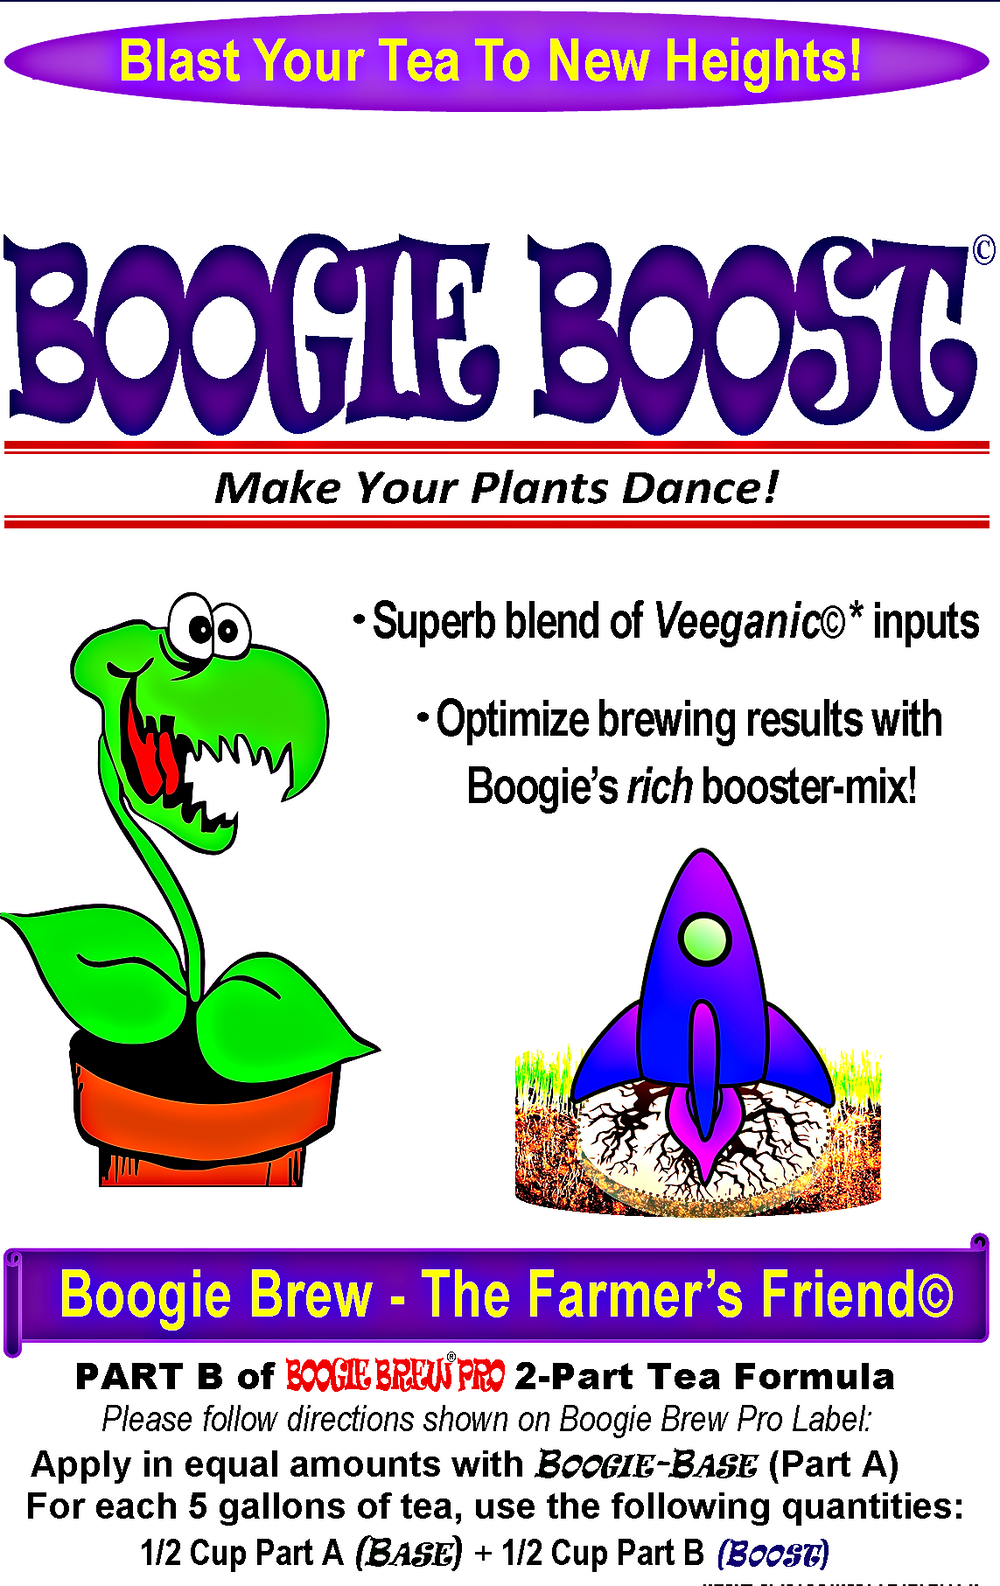 Boogie Boost